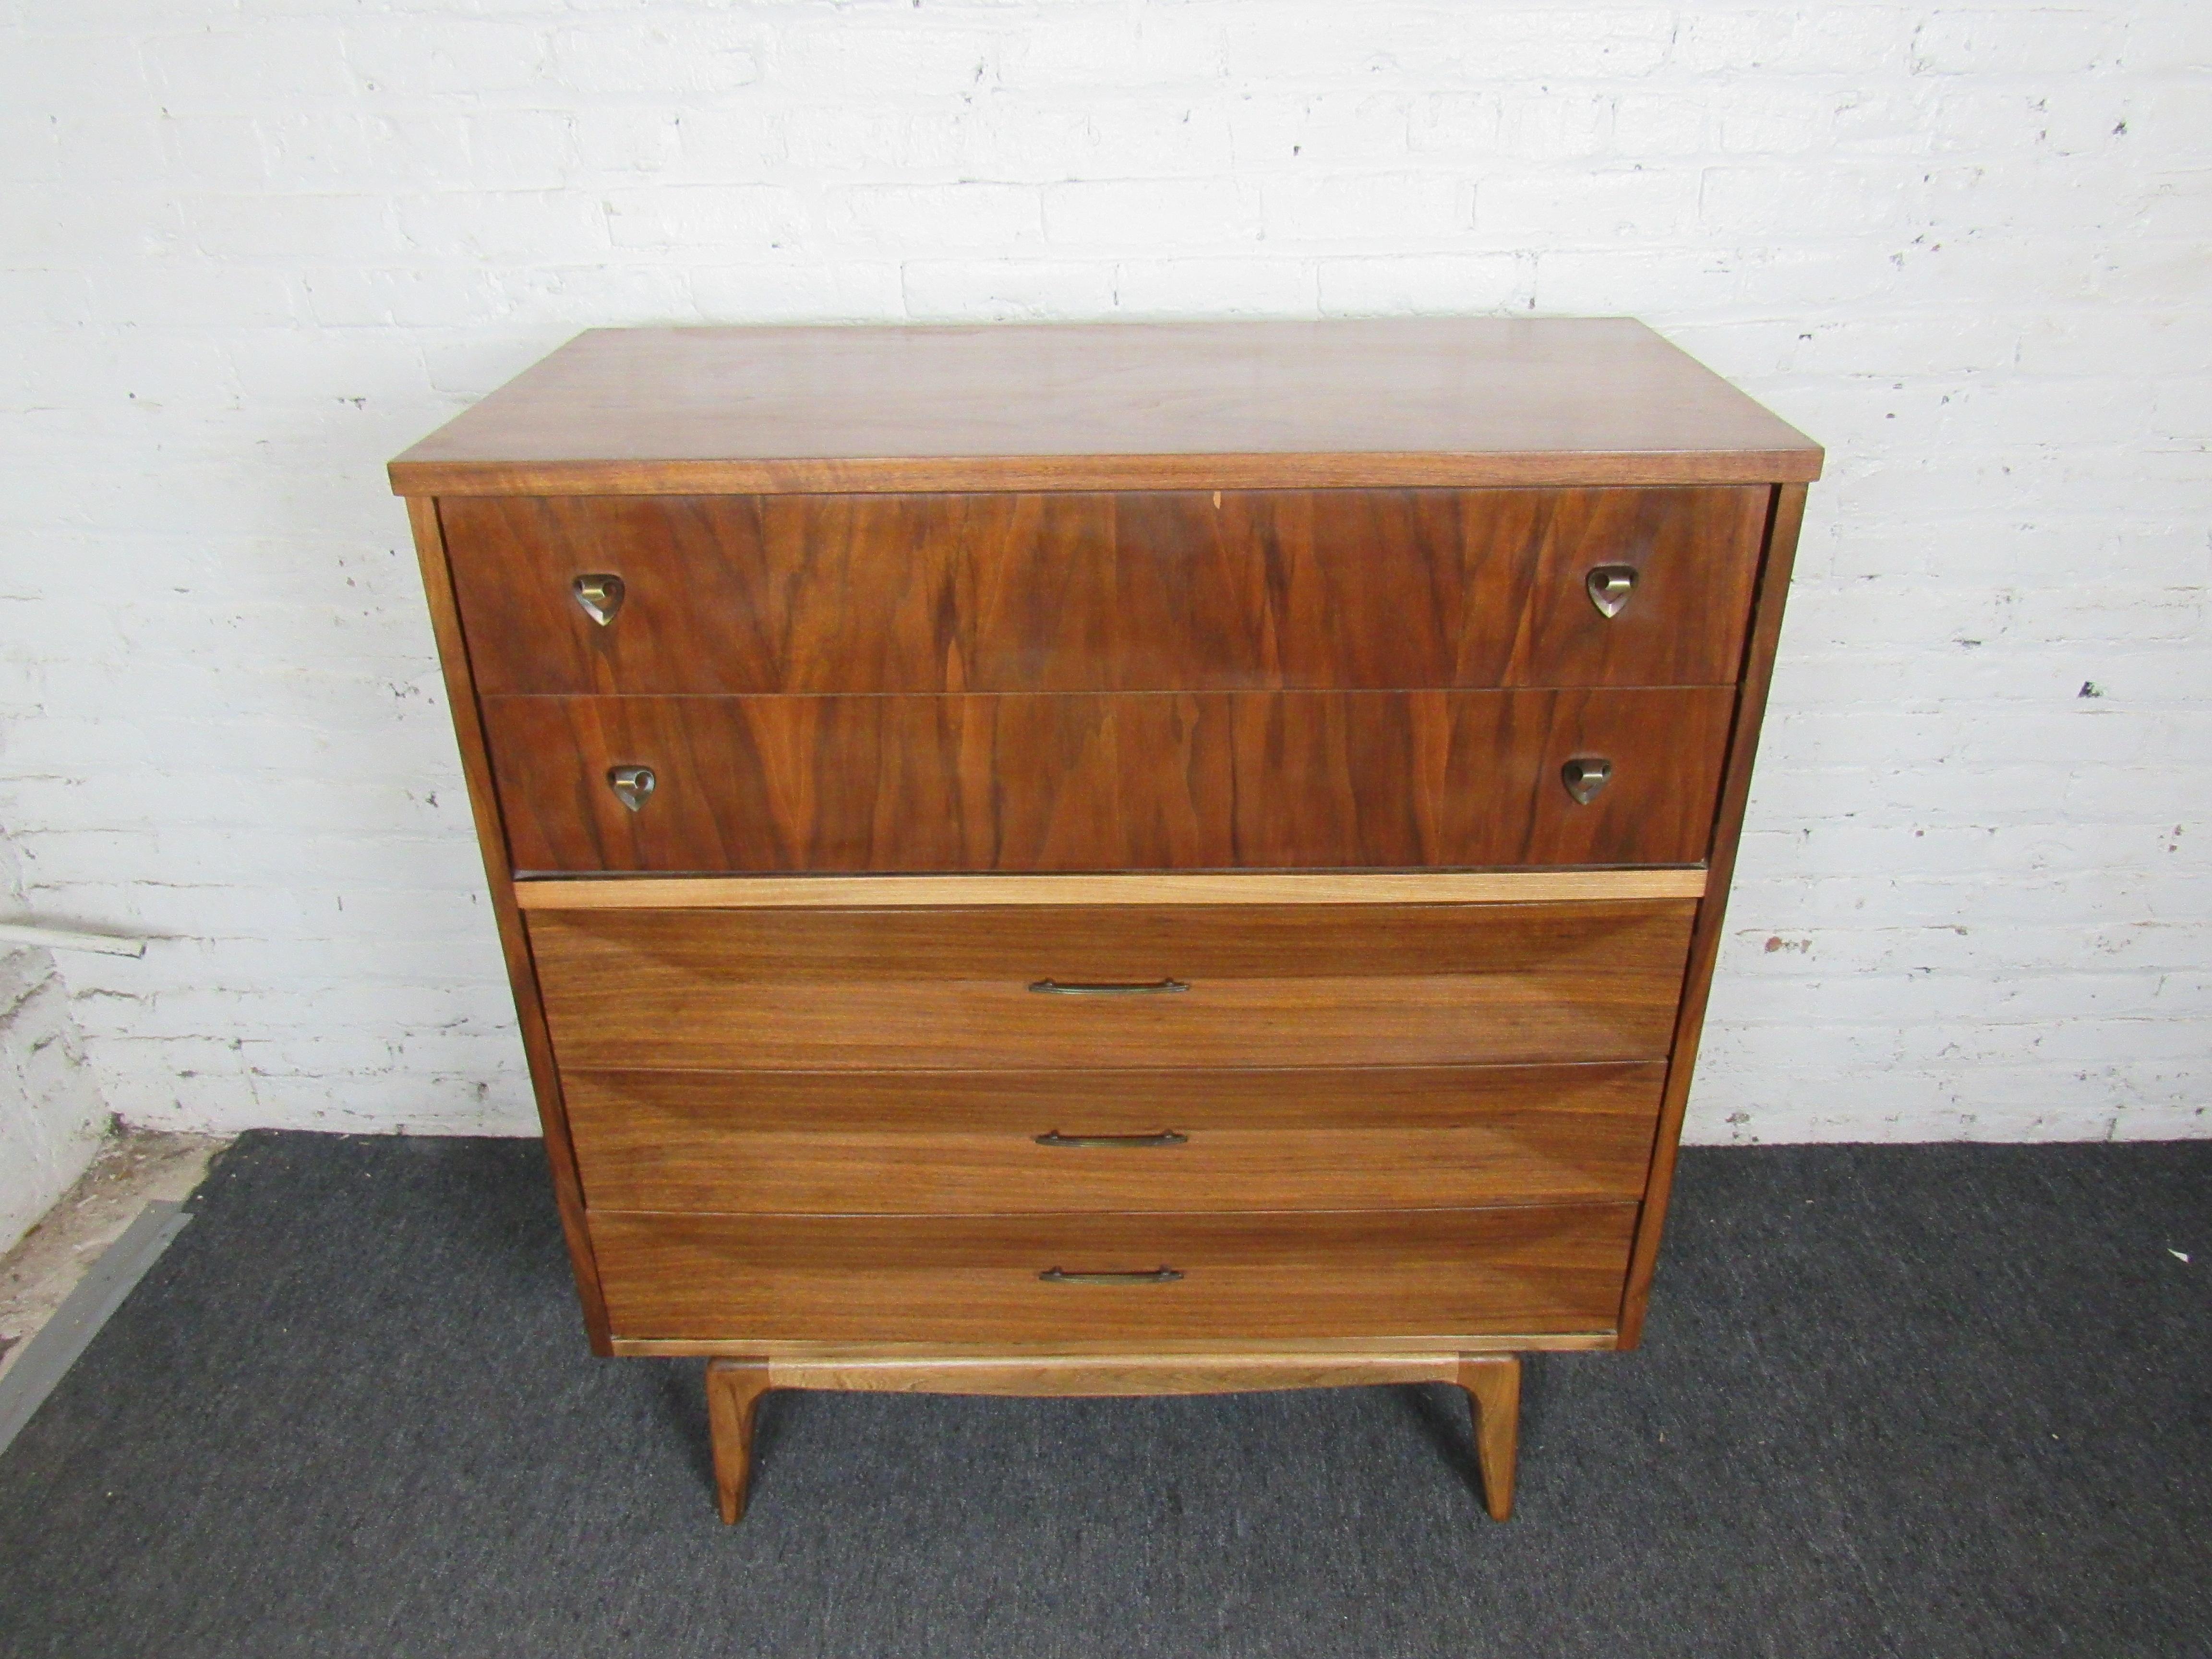 An elegant vintage dresser by United Furniture Corporation, crafted with sturdy mid-century quality and rich walnut. Please confirm item location with seller (NY/NJ).